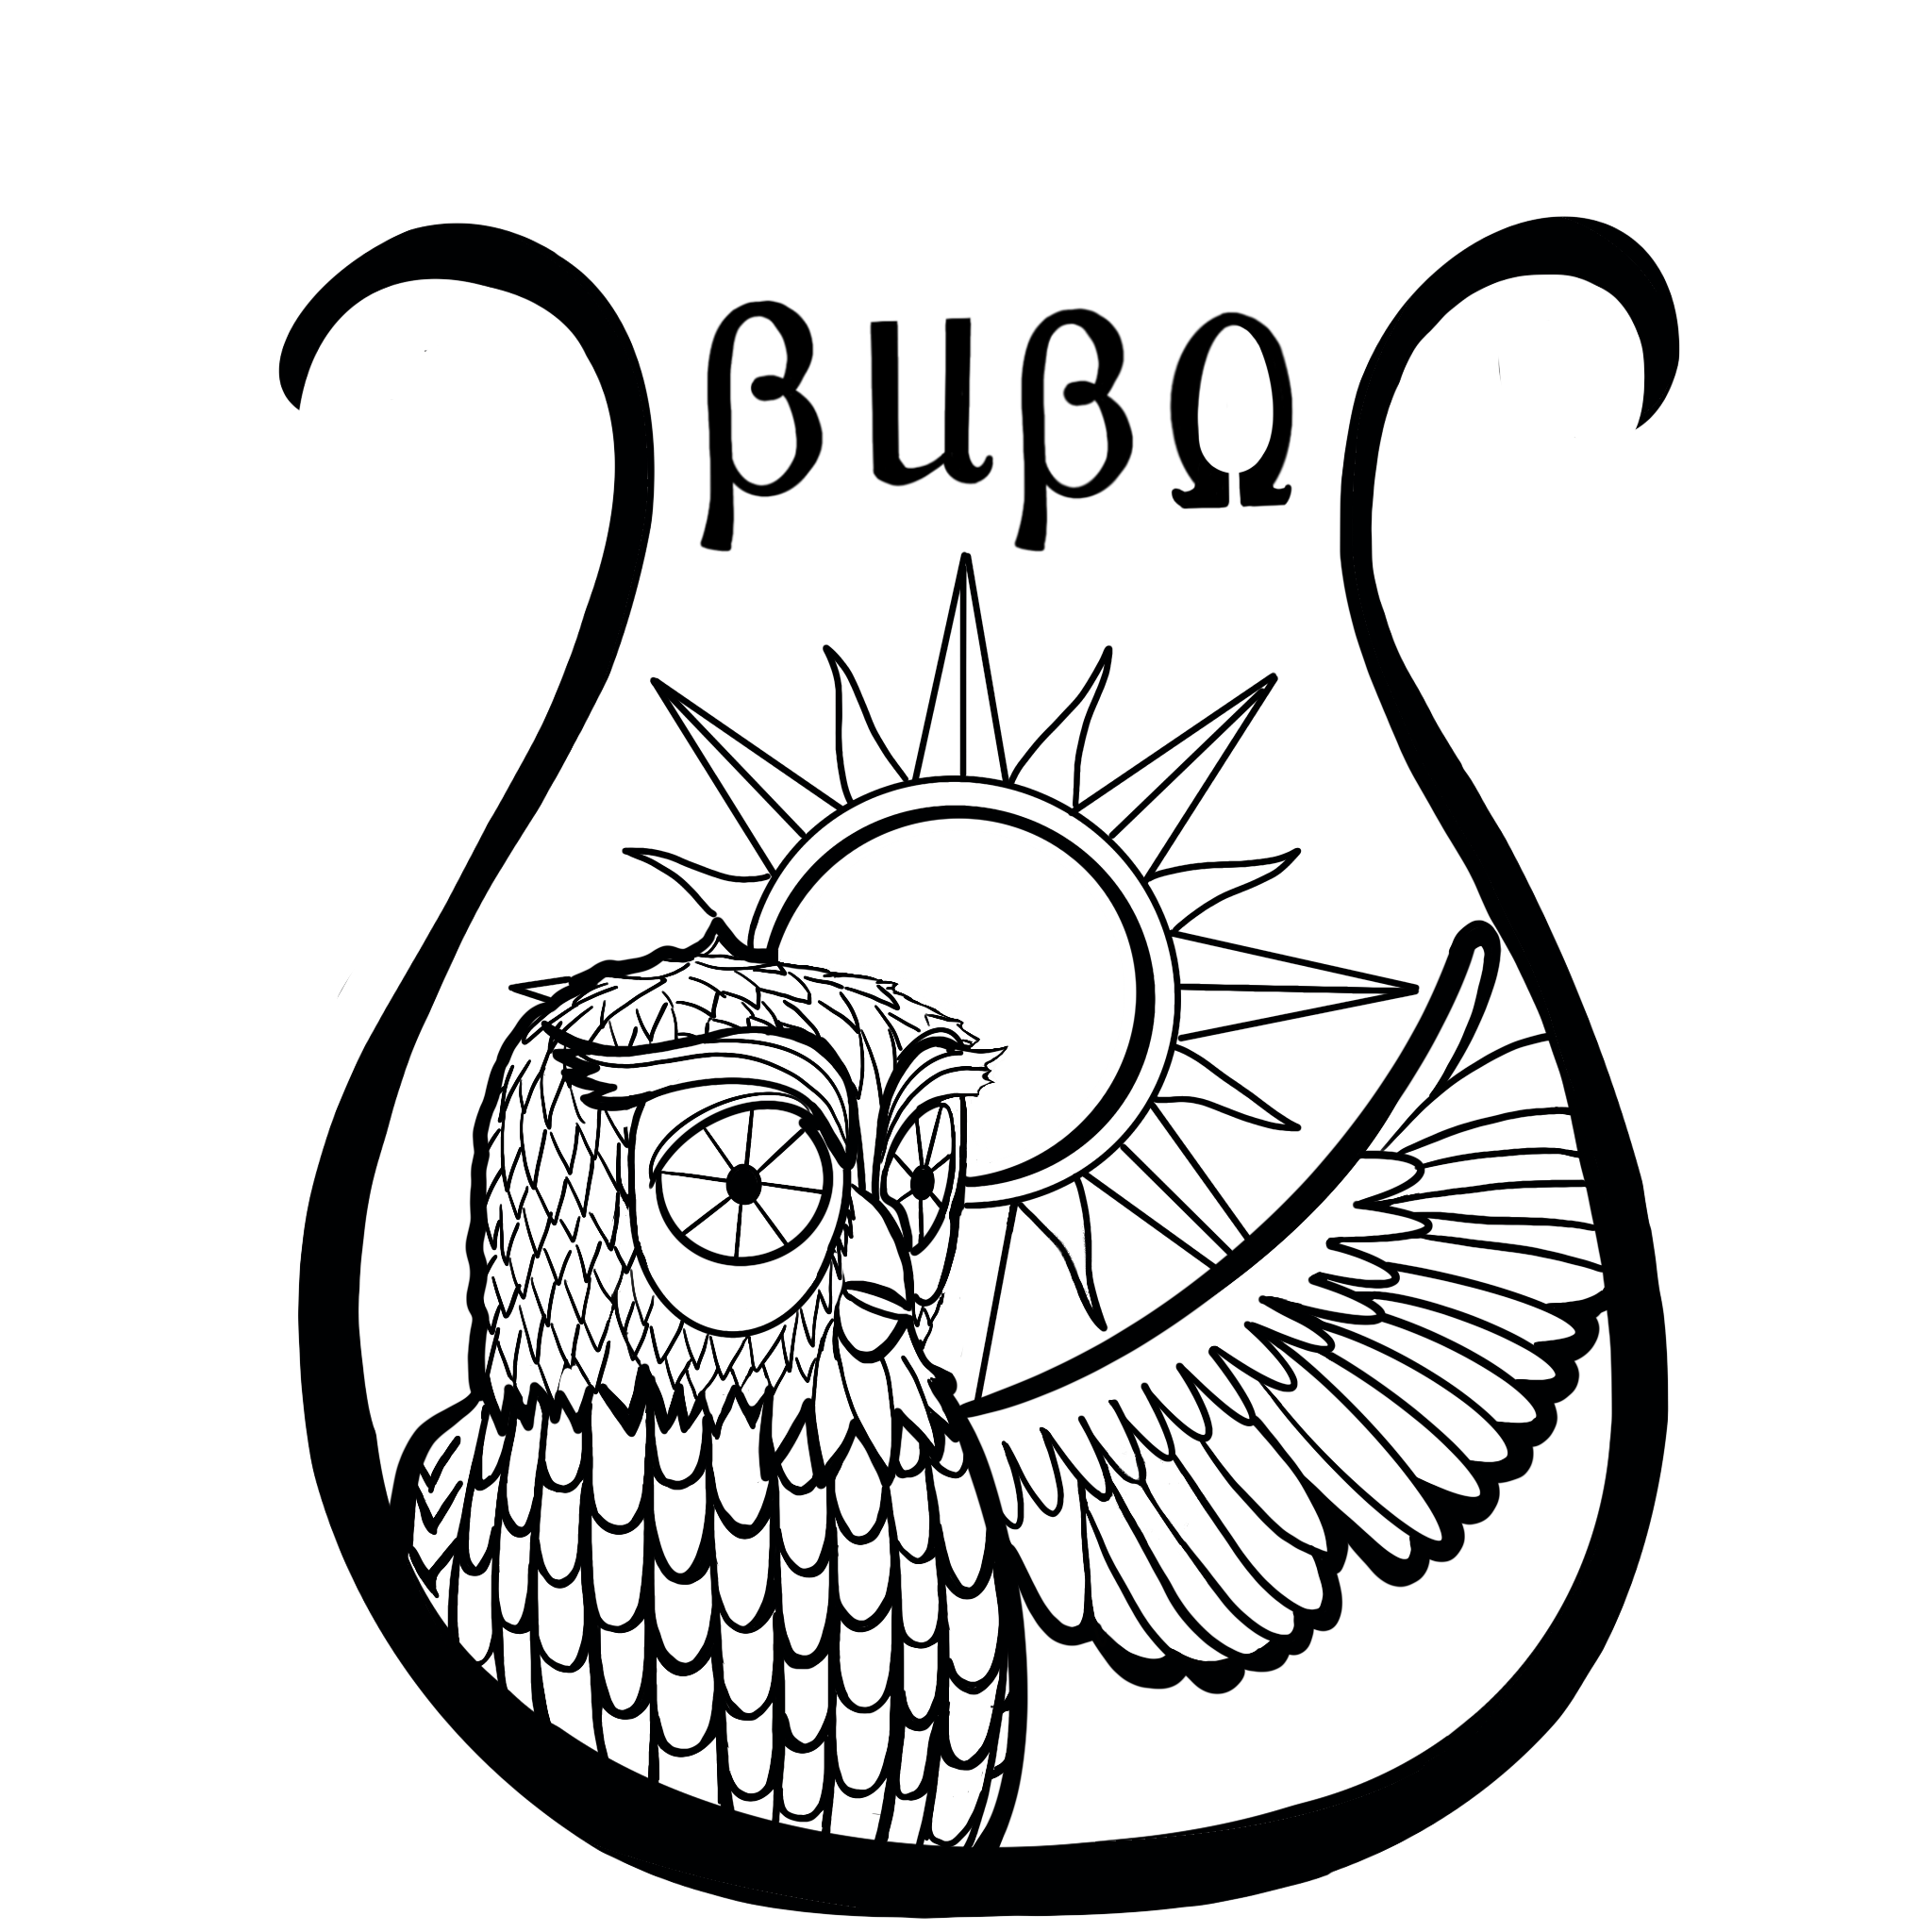 BUBO logo showing an owl and a sun inside a lyre